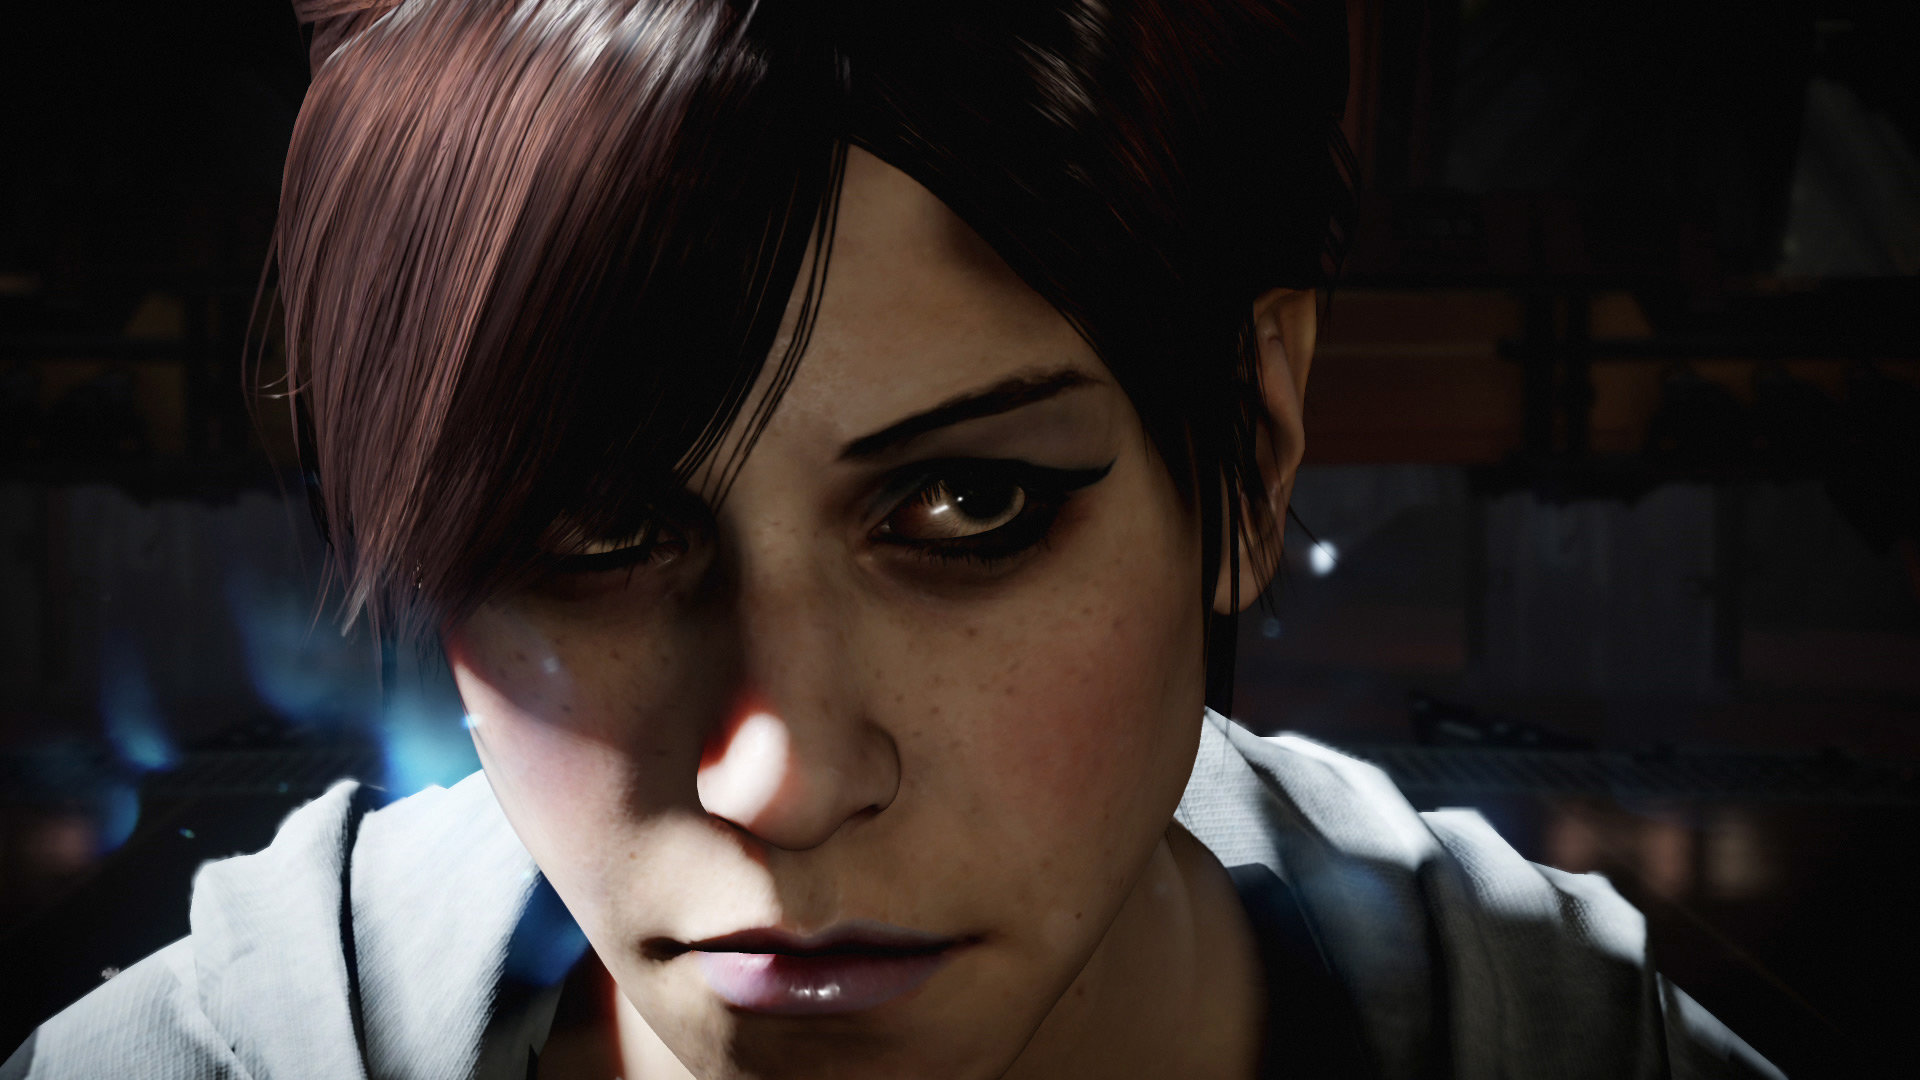 inFAMOUS: First Light Wallpapers